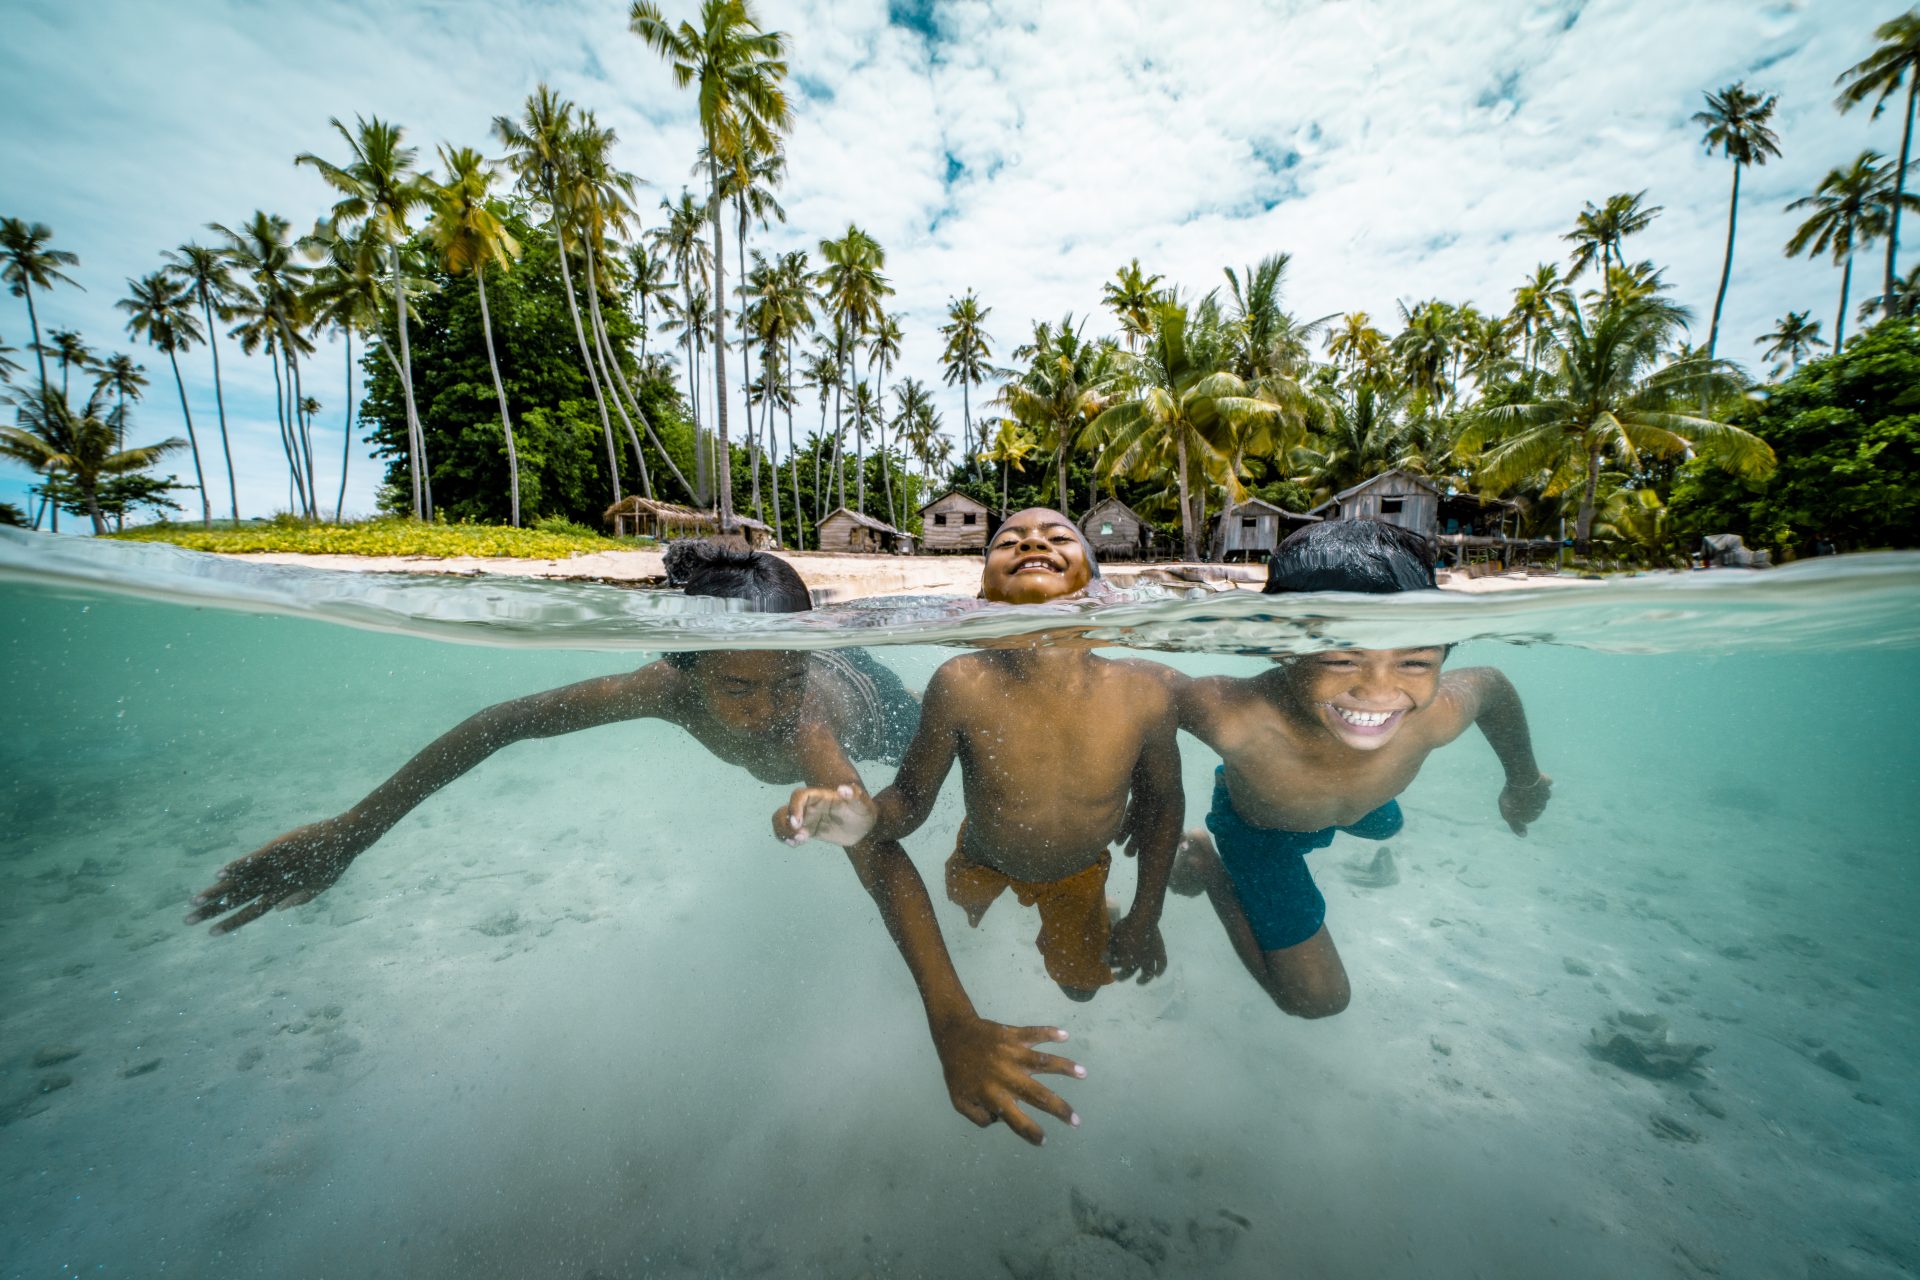 The Bajau, these people have a genetic mutation allowing them to live in the sea!